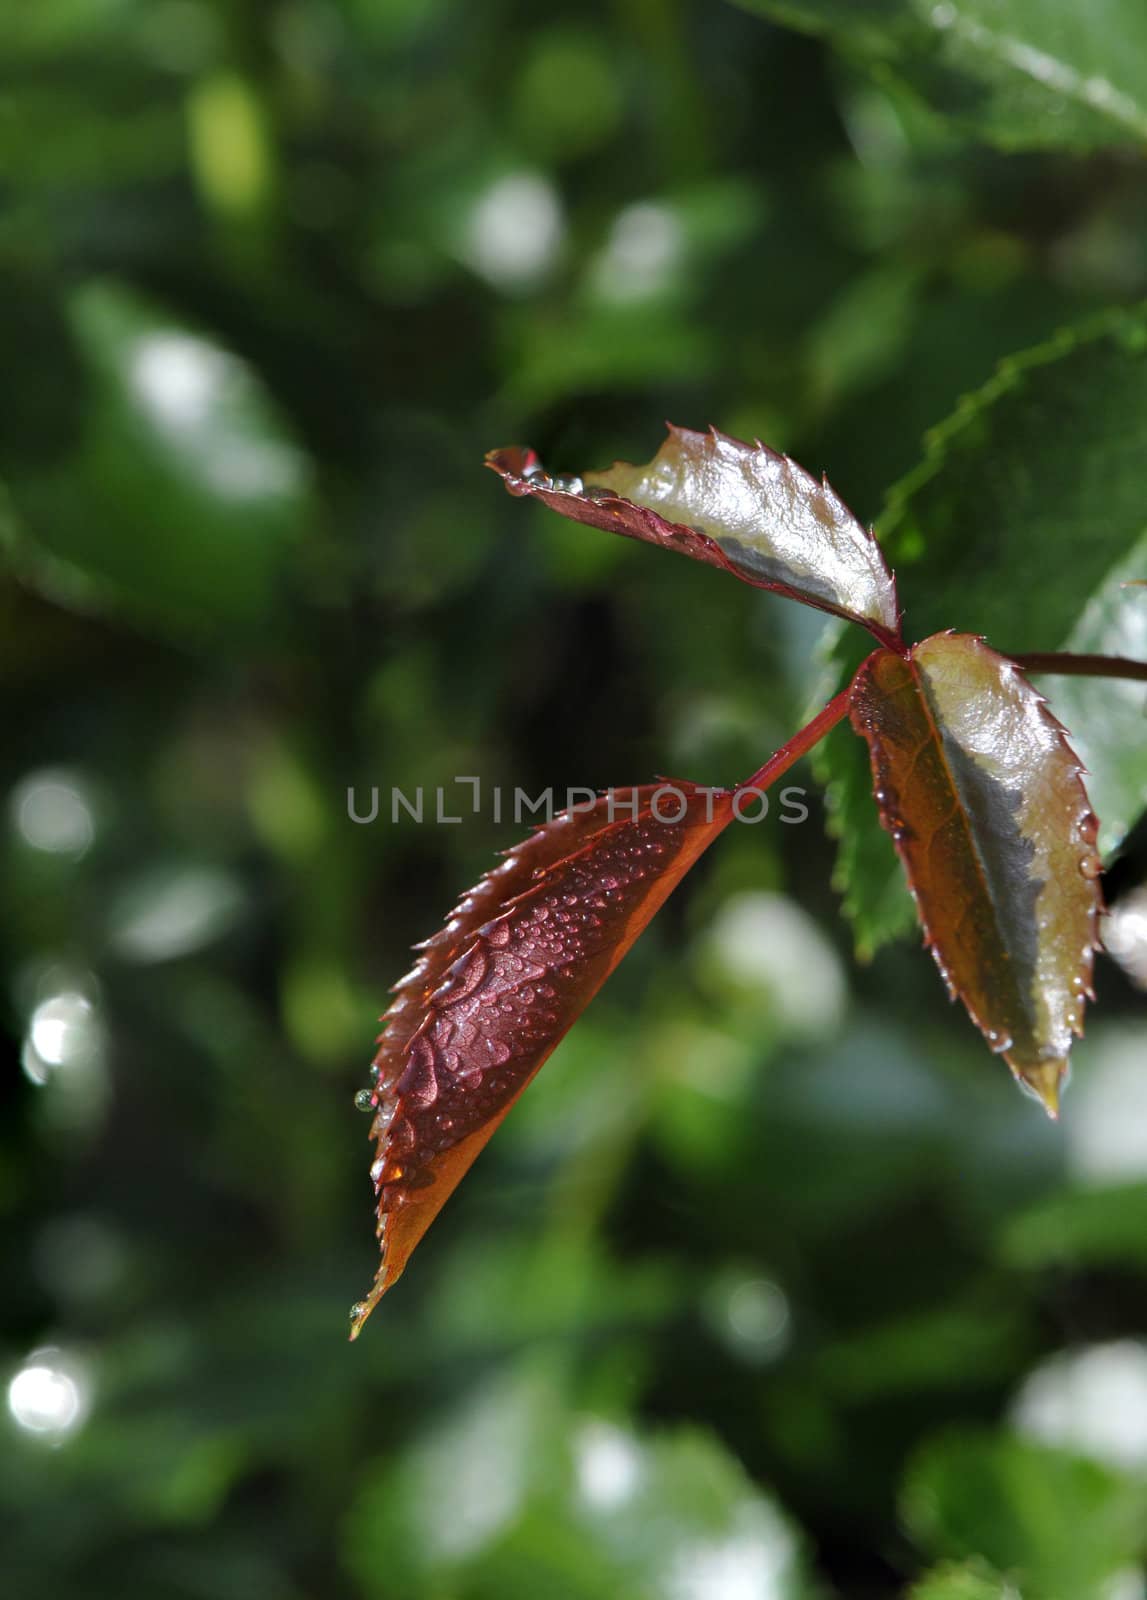 Water Droplets on Red Leafs by shkyo30